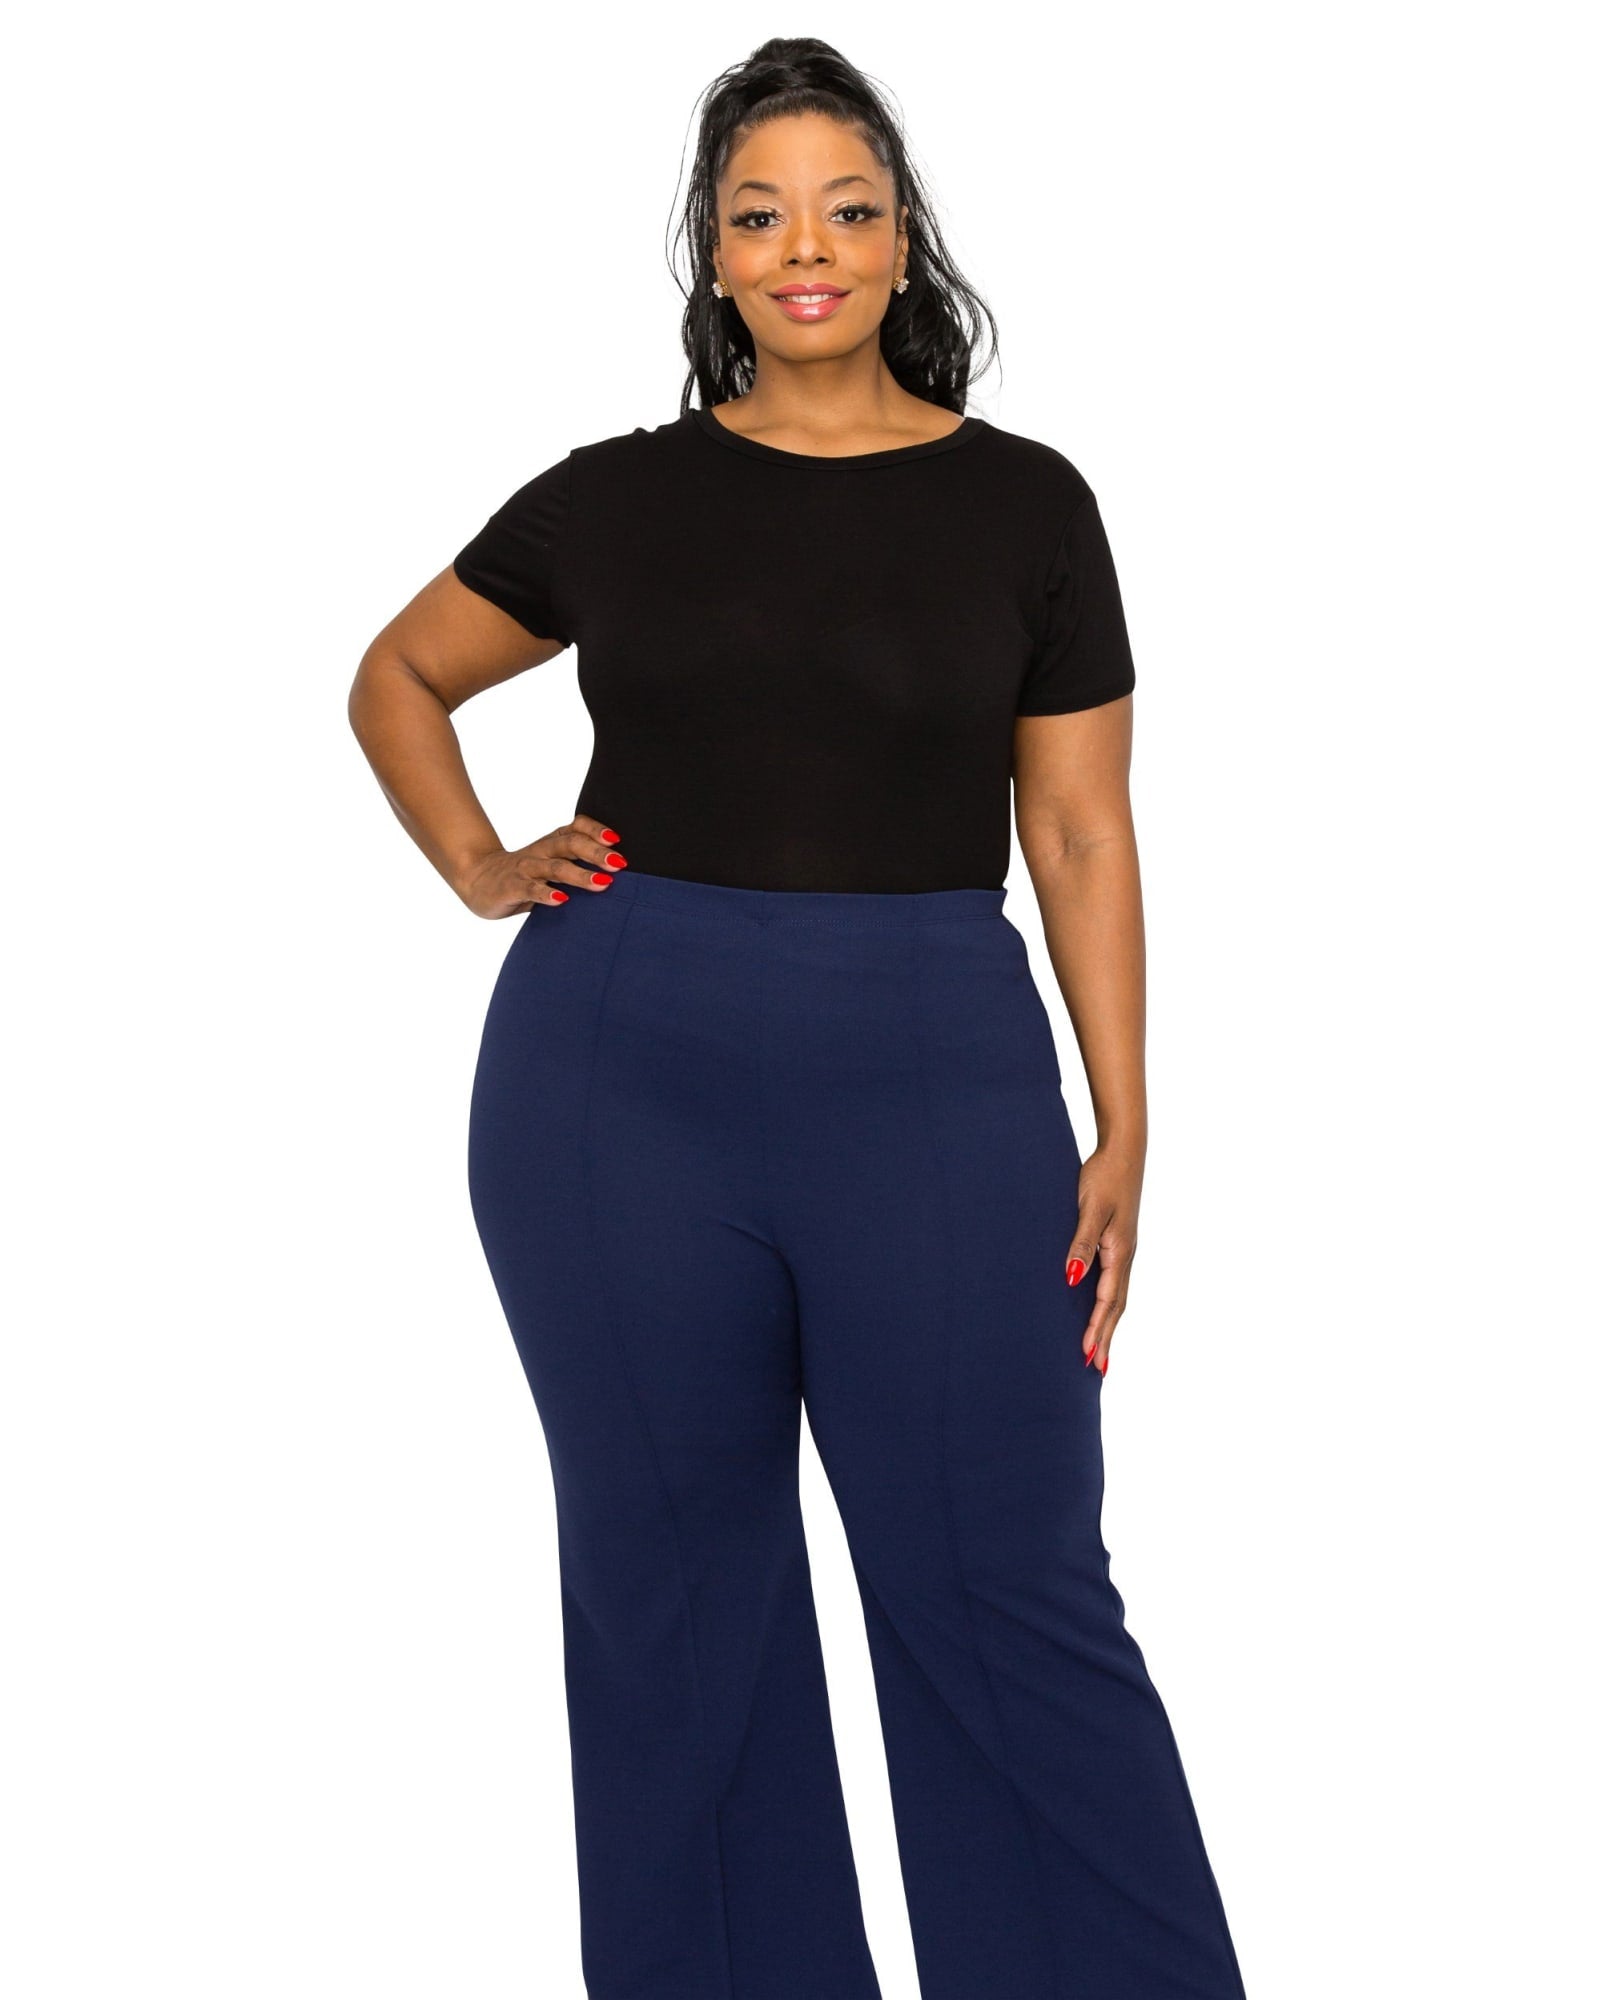 ShopWonder Plus Size Dress Pants for Women Stretch Pull On Flare Pants  Pockets Dressy Business Casual Work Pants Navy Blue XL at  Women's  Clothing store